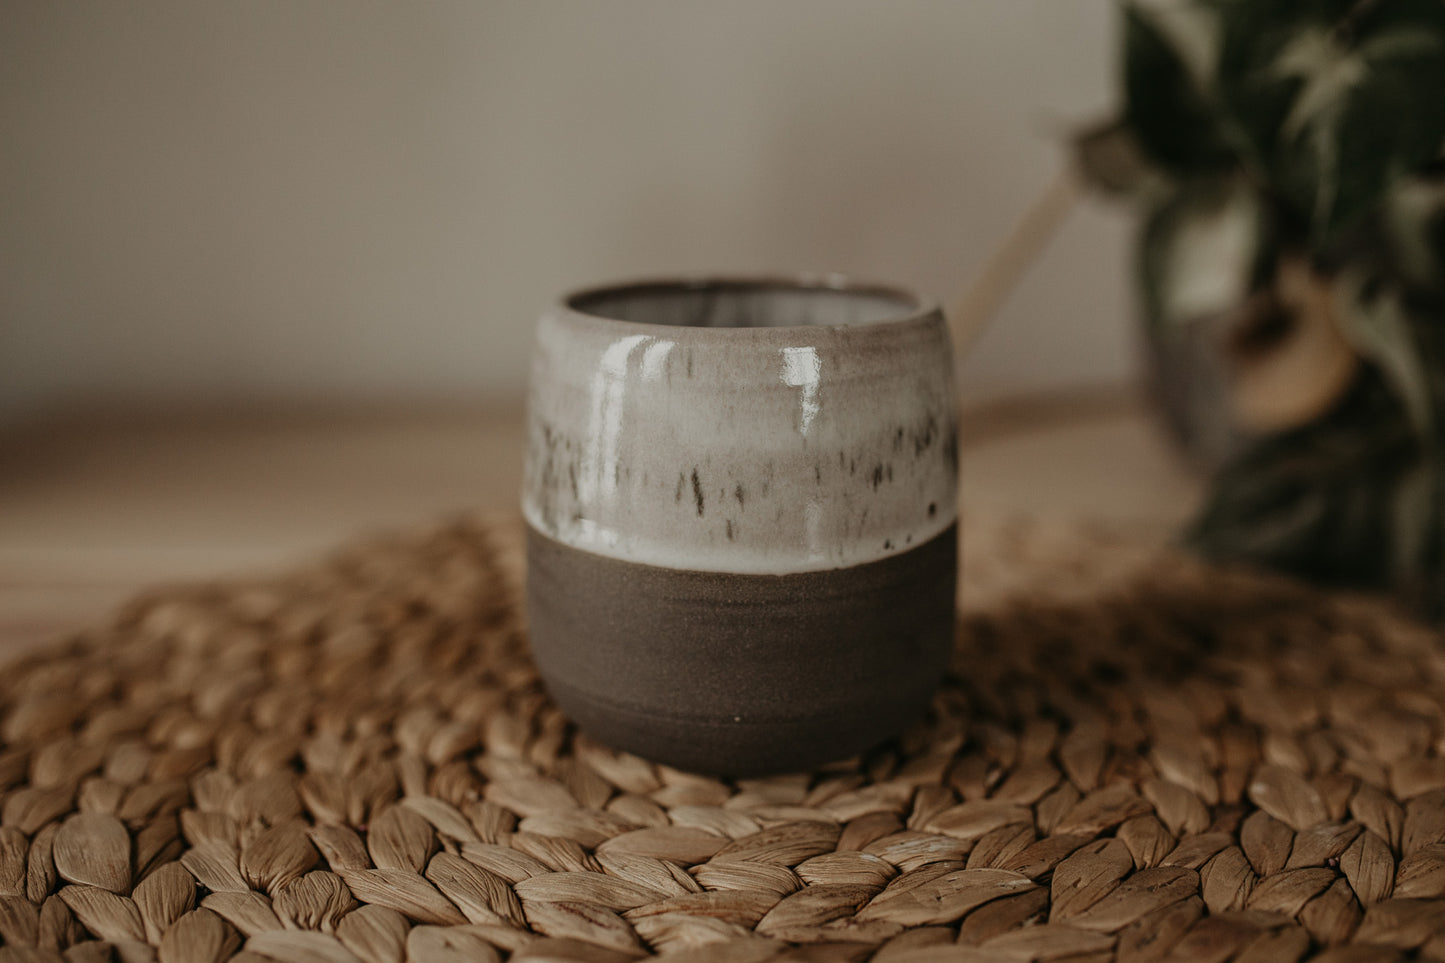 Step up your home decor with our handmade Stoneware Pottery Ceramic Gray Tumbler in Smoked Grey- the perfect unique design for any home. Perfect for any occasion, these one of a kind tumblers make an ideal house warming or drinkware gift.